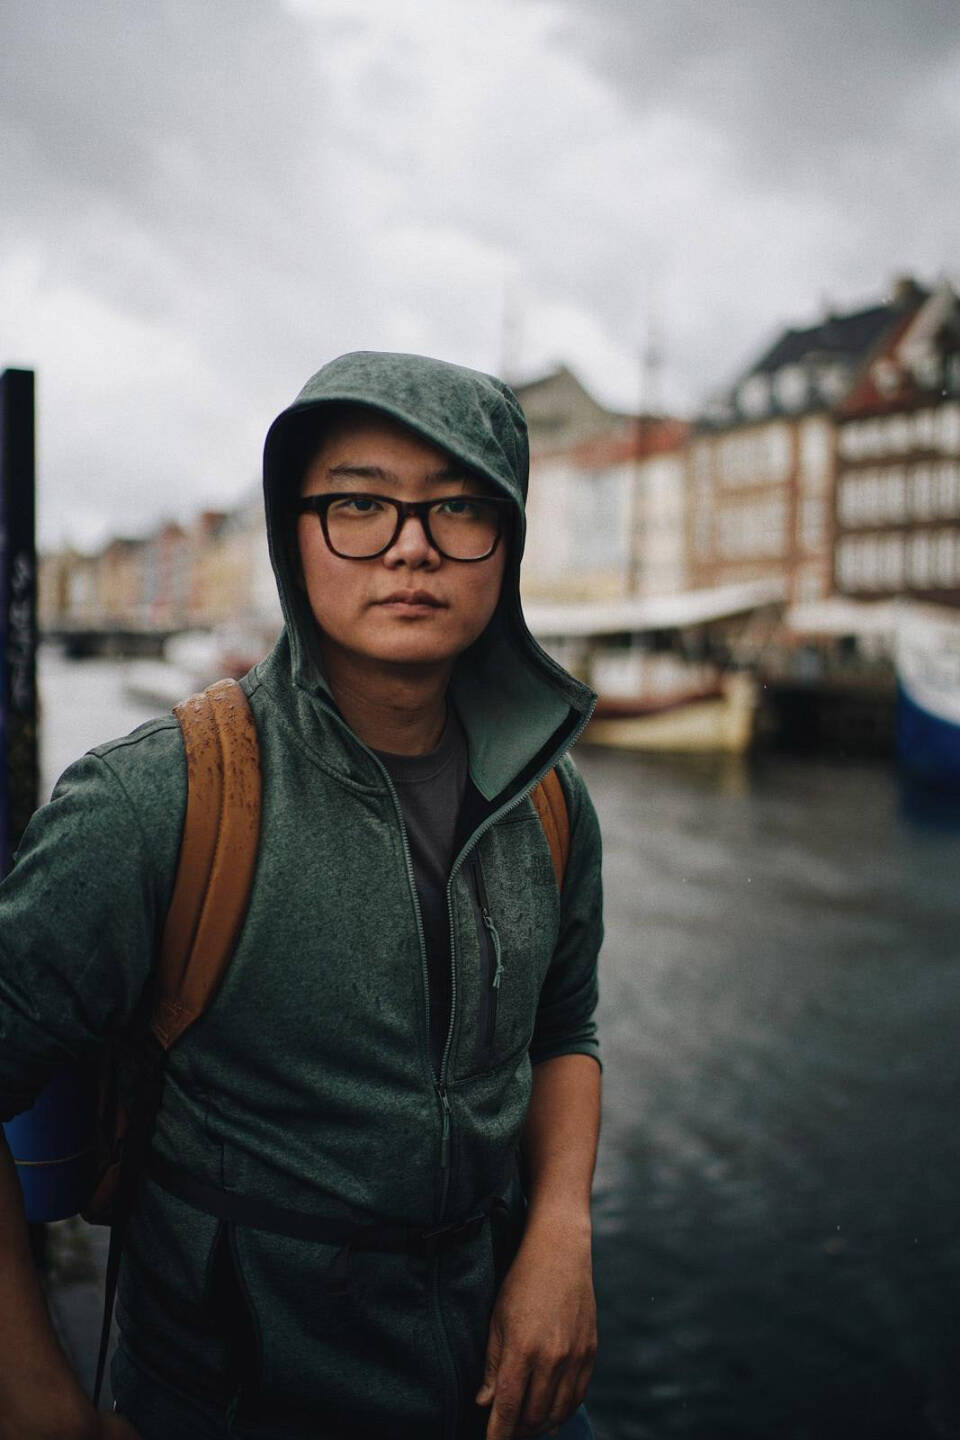 Jason Kim is photographed in Nyhavn, Denmark in September 2017. Photo by Alex Rodriguez